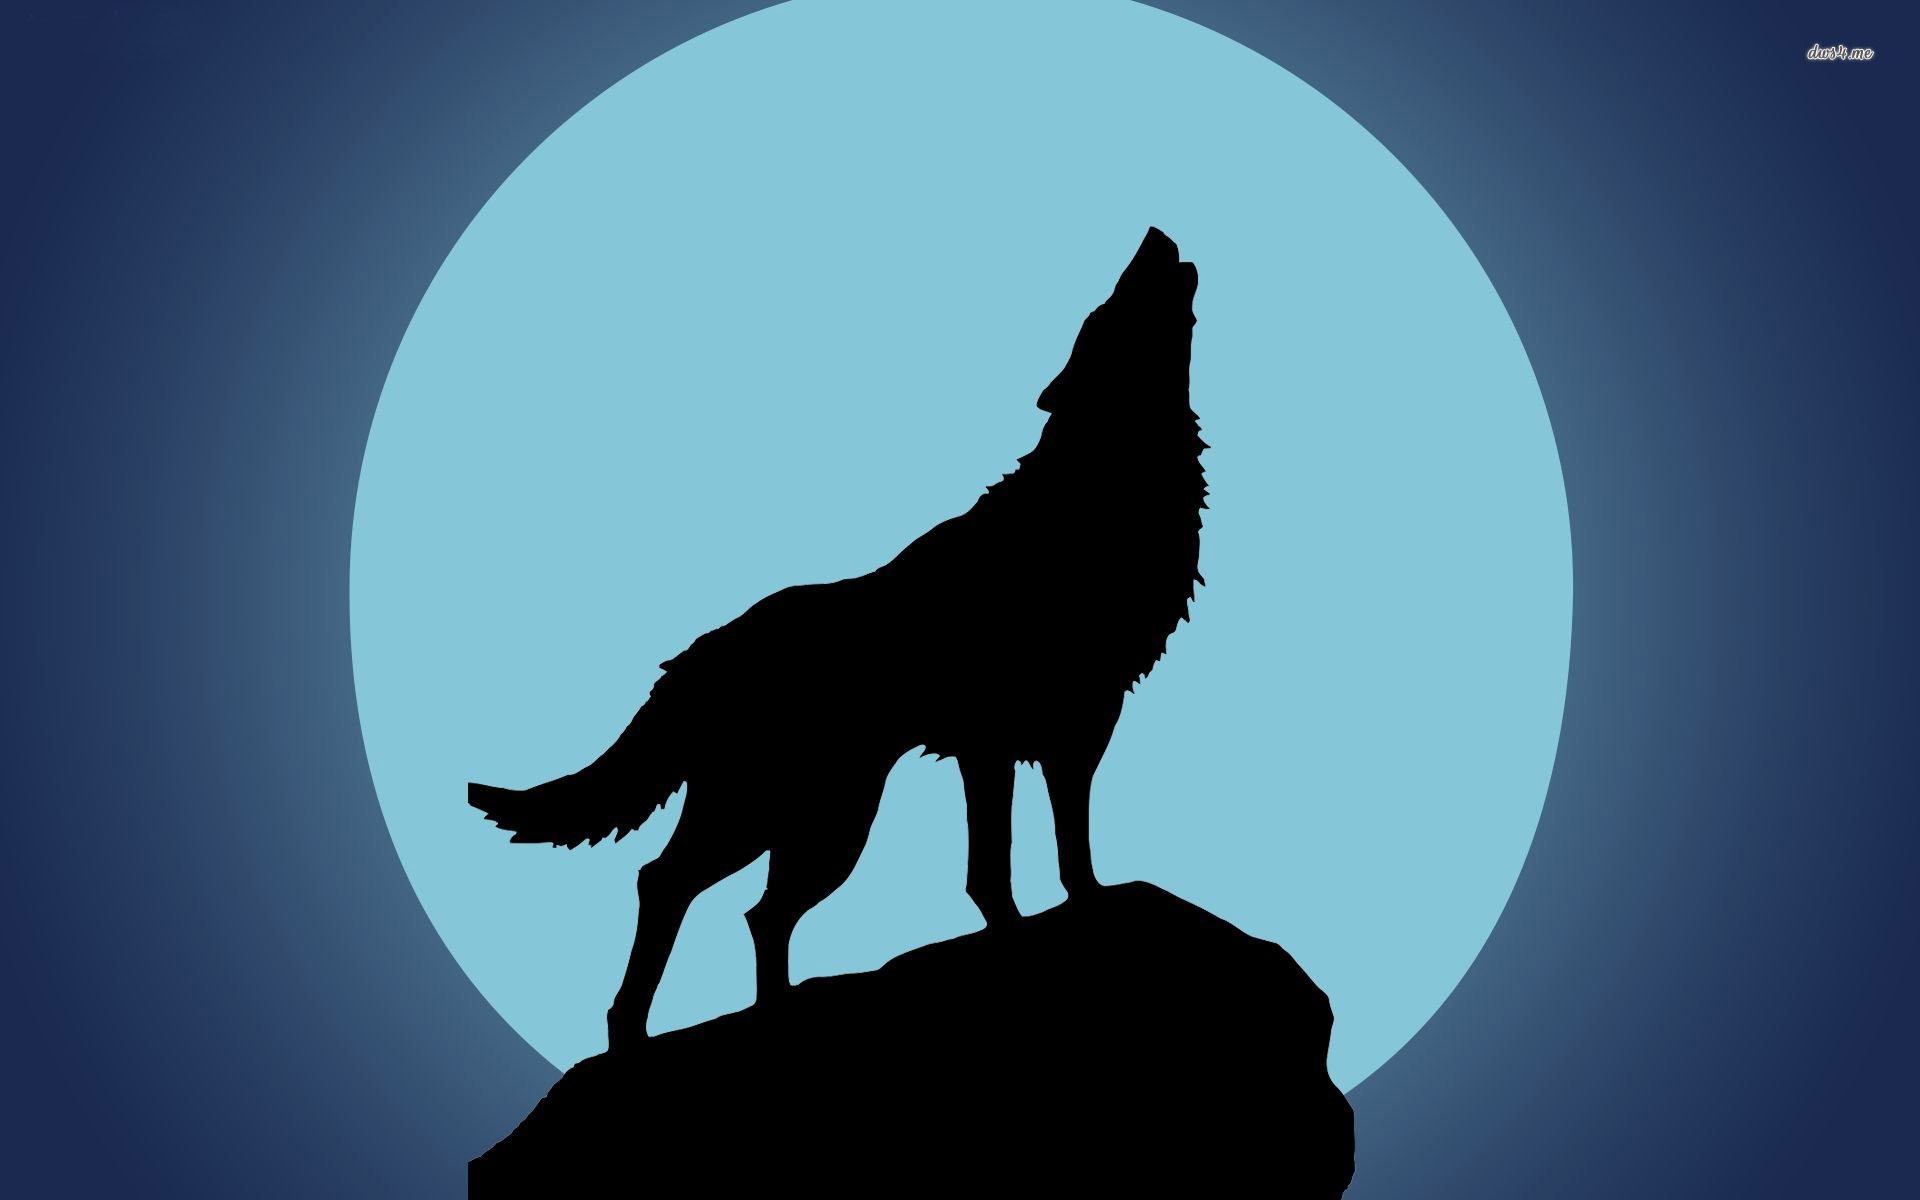 Howling Wolf @ The Moon - ClipArt Best